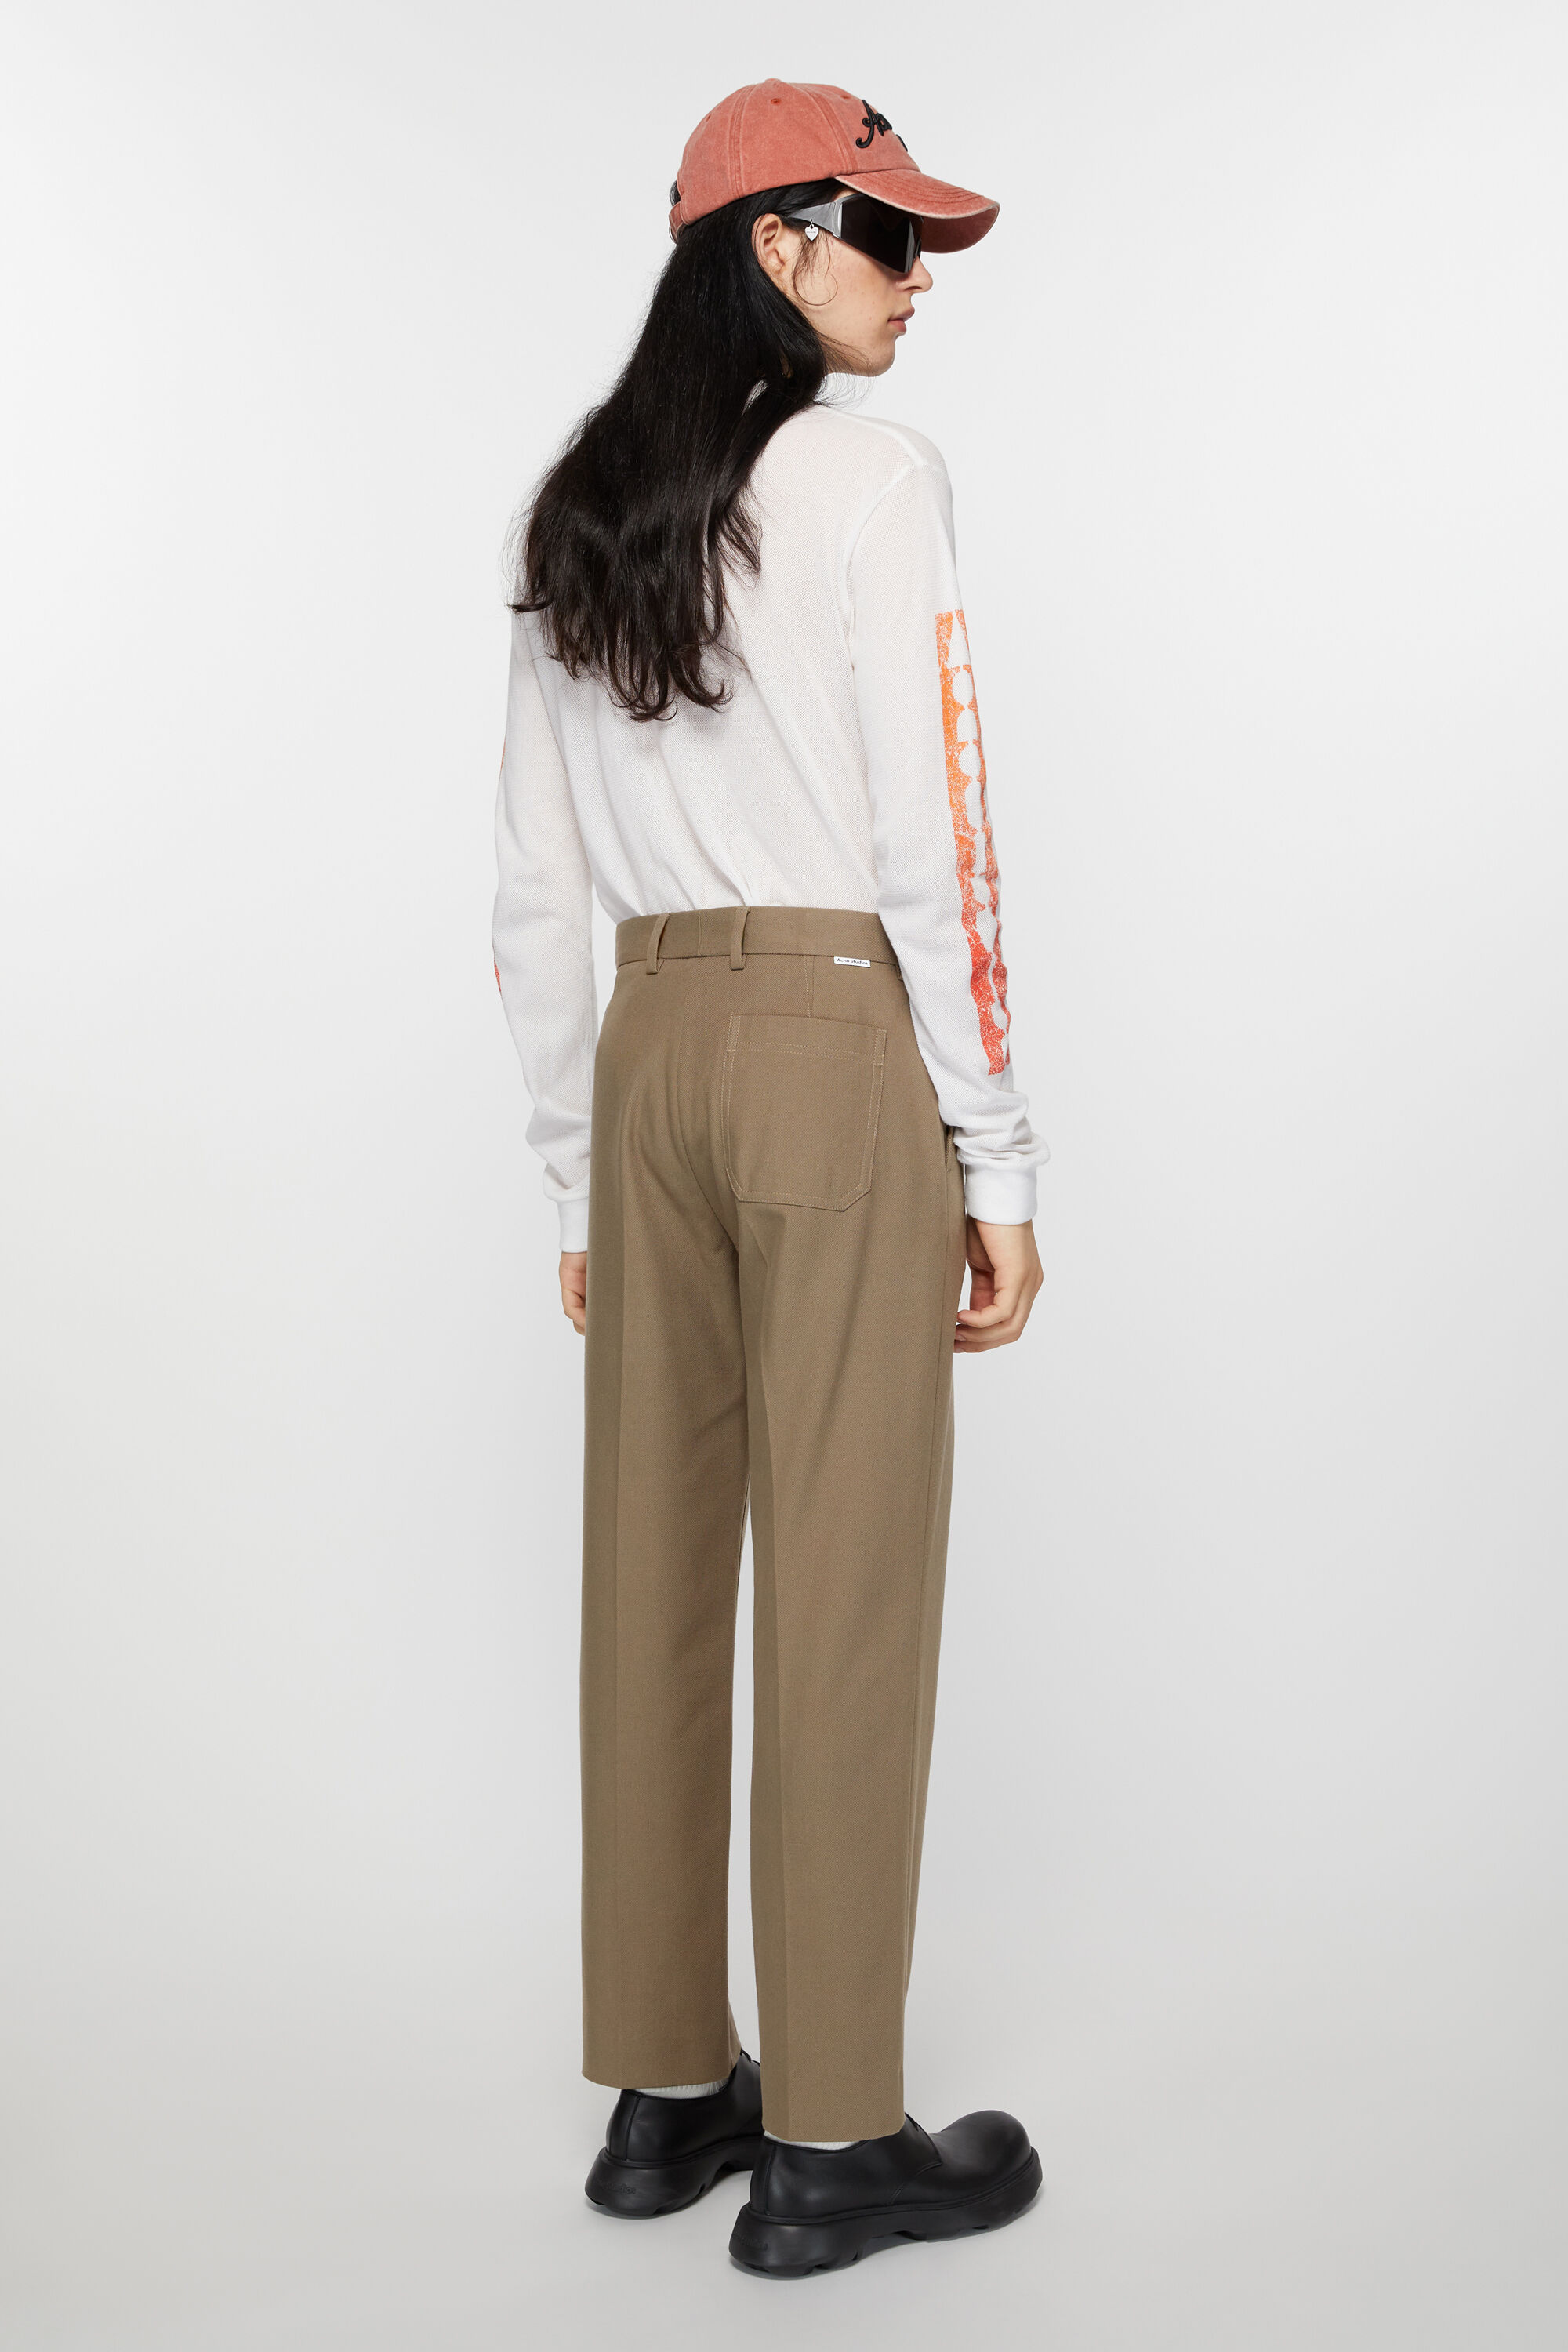 Twill cotton-blend trousers